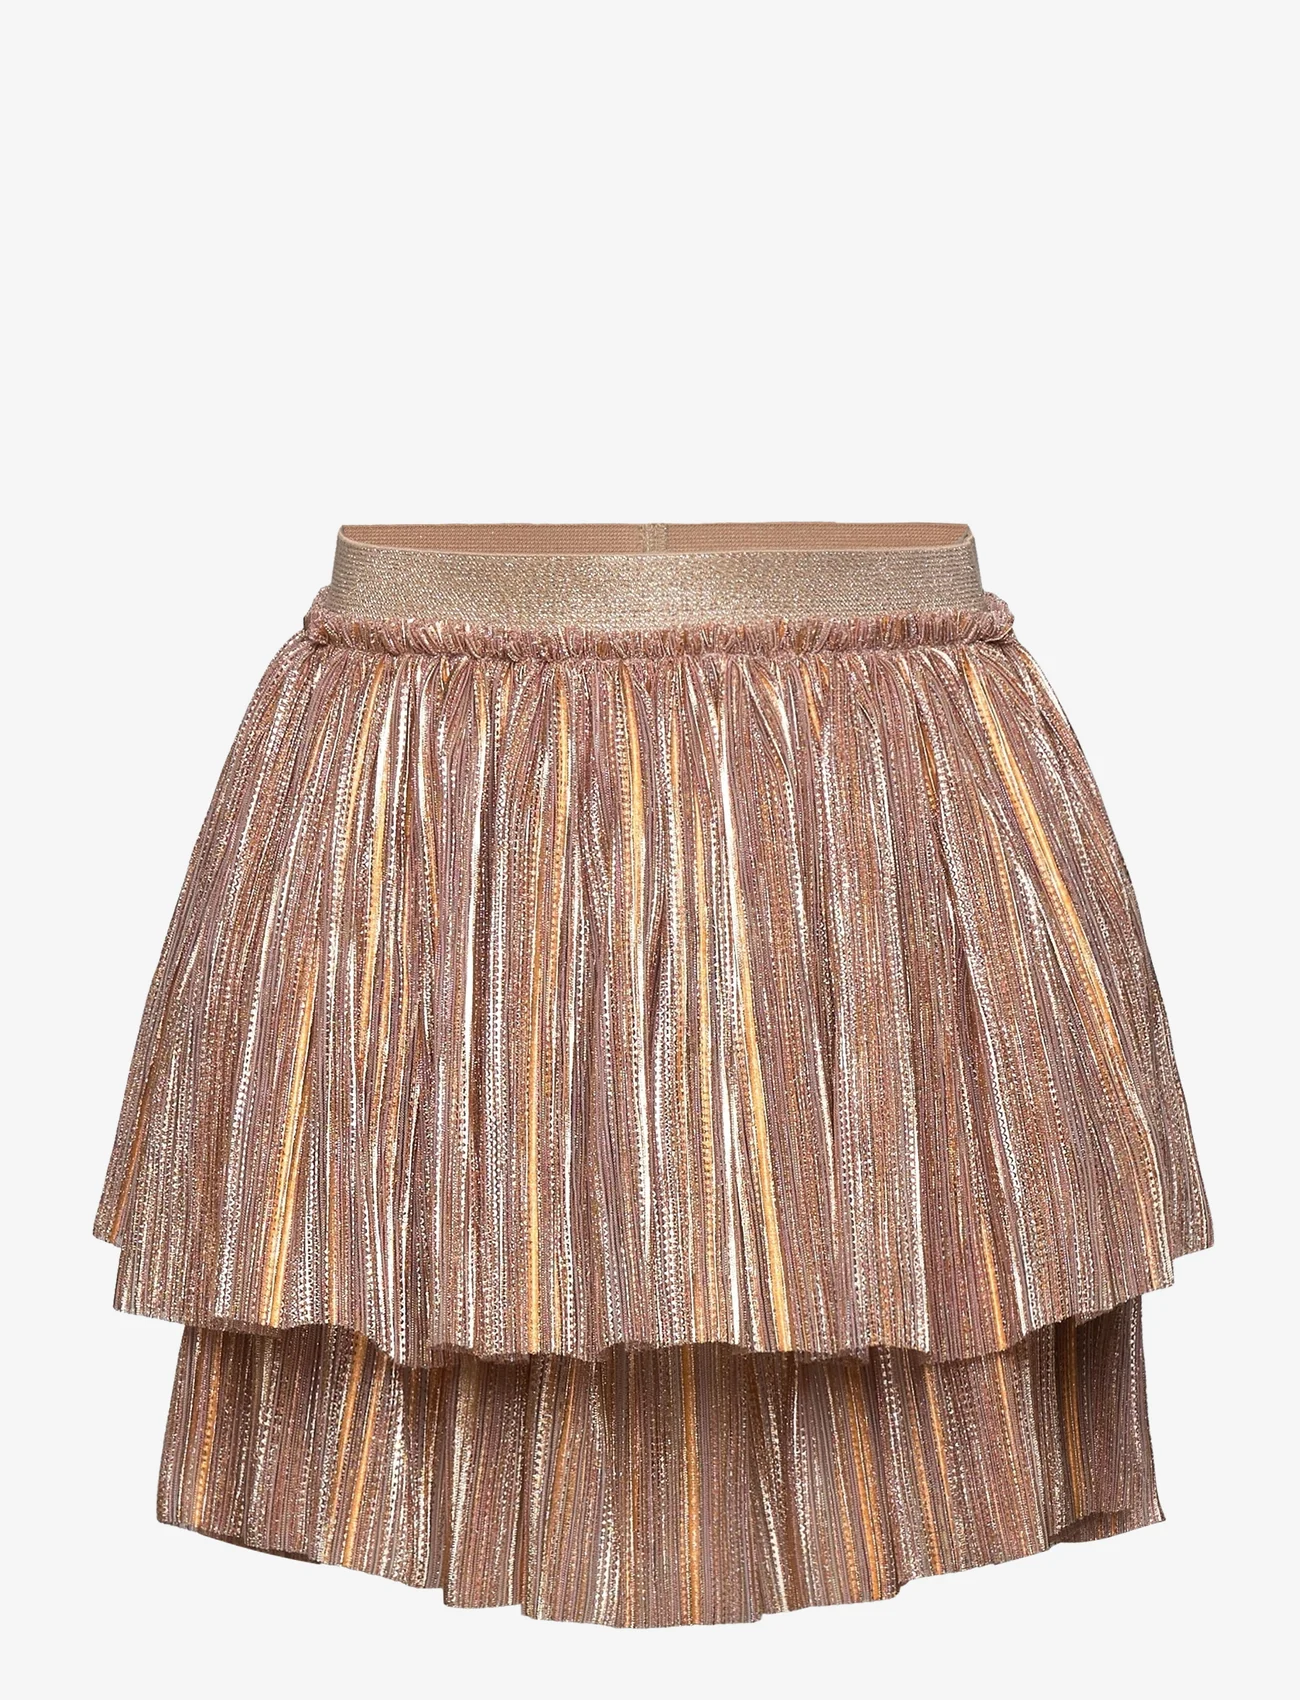 Sofie Schnoor Baby and Kids - Skirt - tulle skirts - rose gold - 0